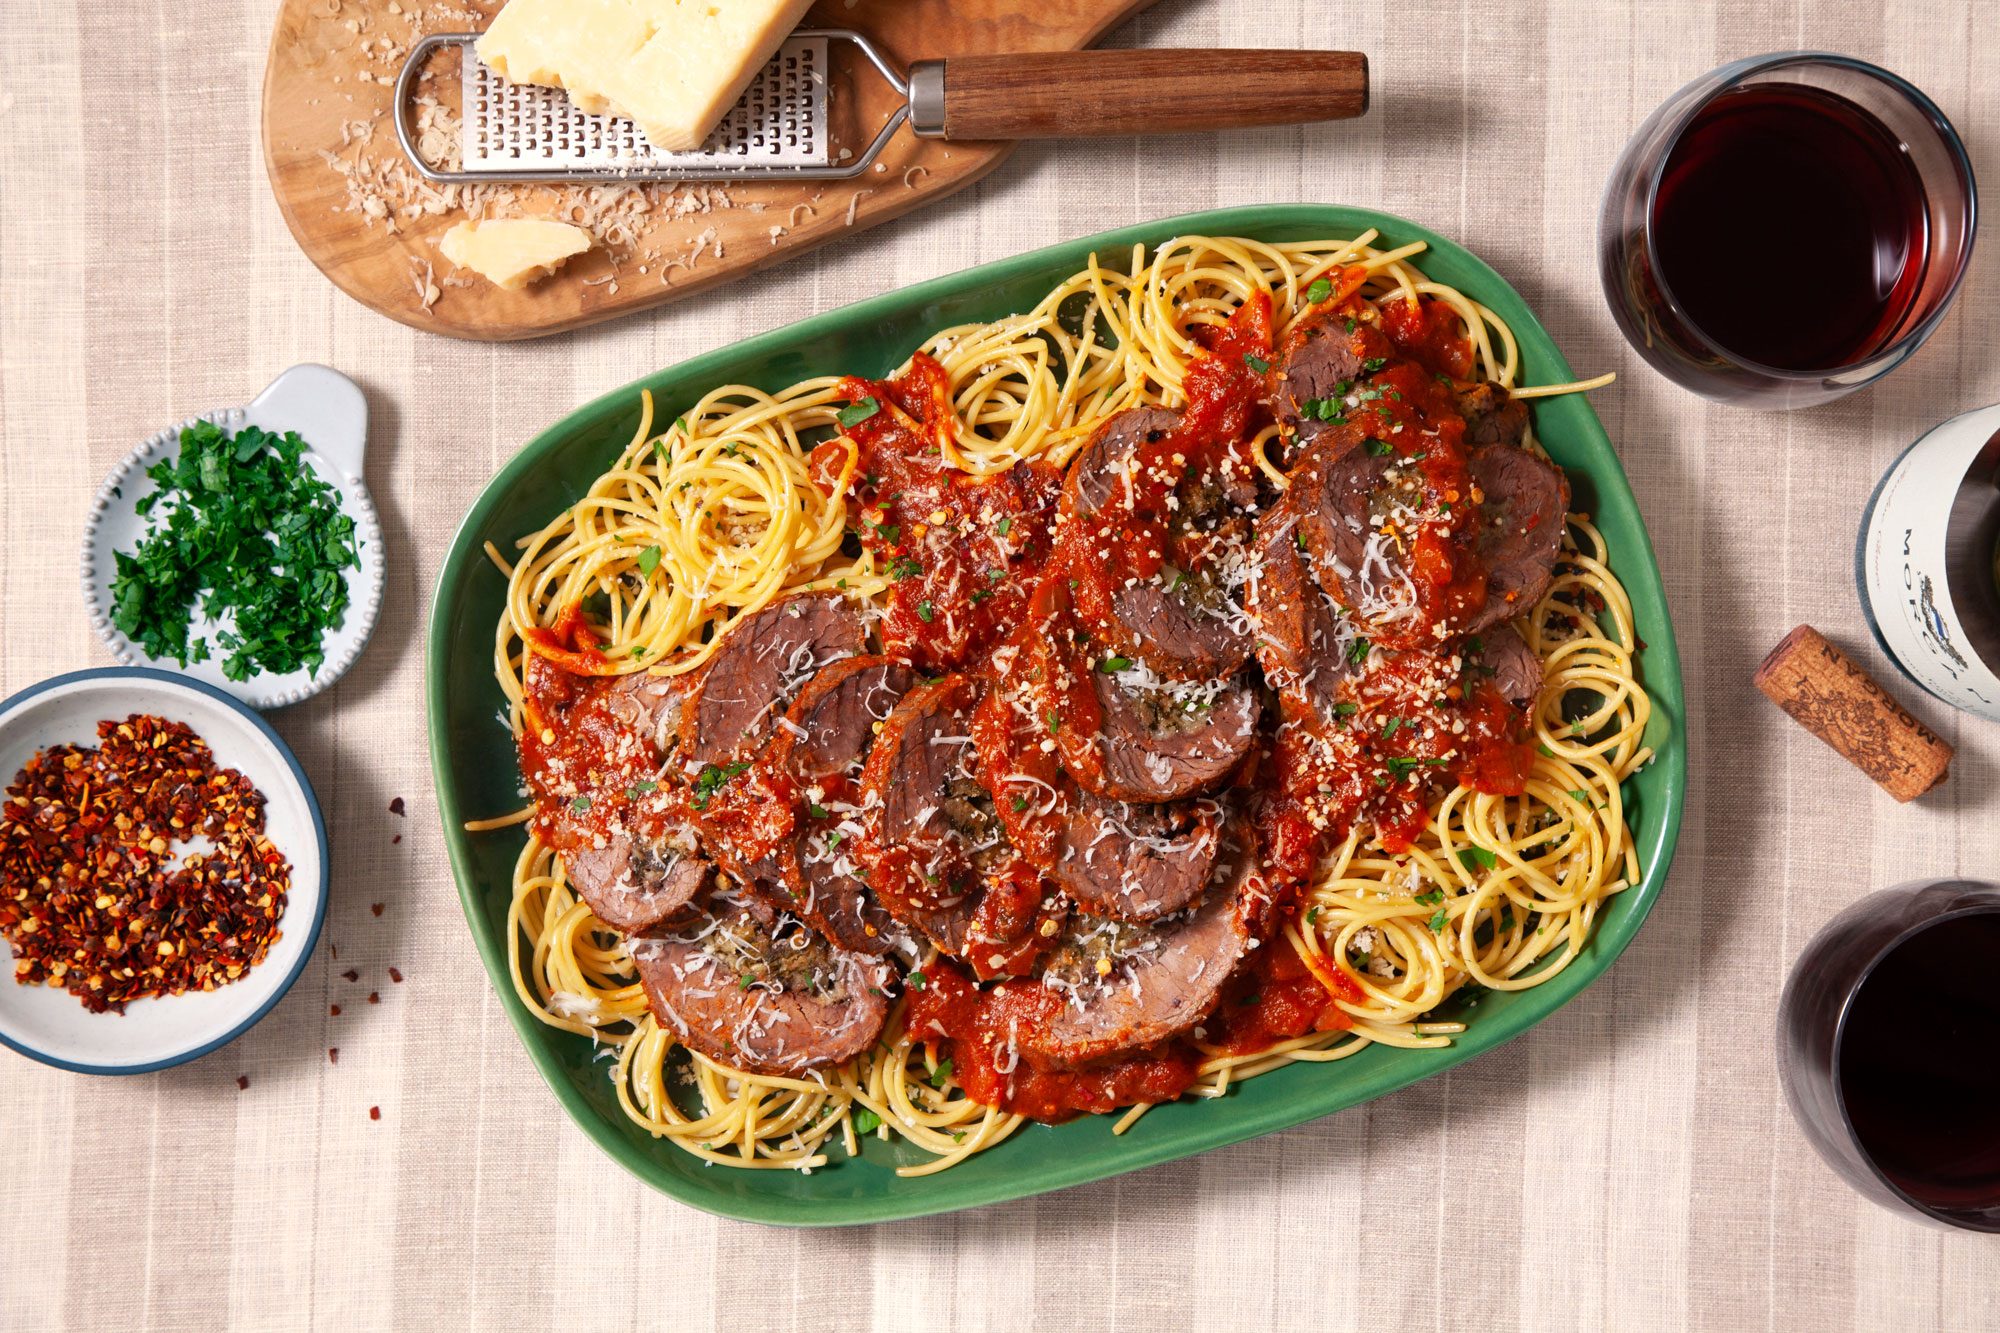 Serve Braciole over spaghetti with grated Parmesan cheese and minced fresh parsley